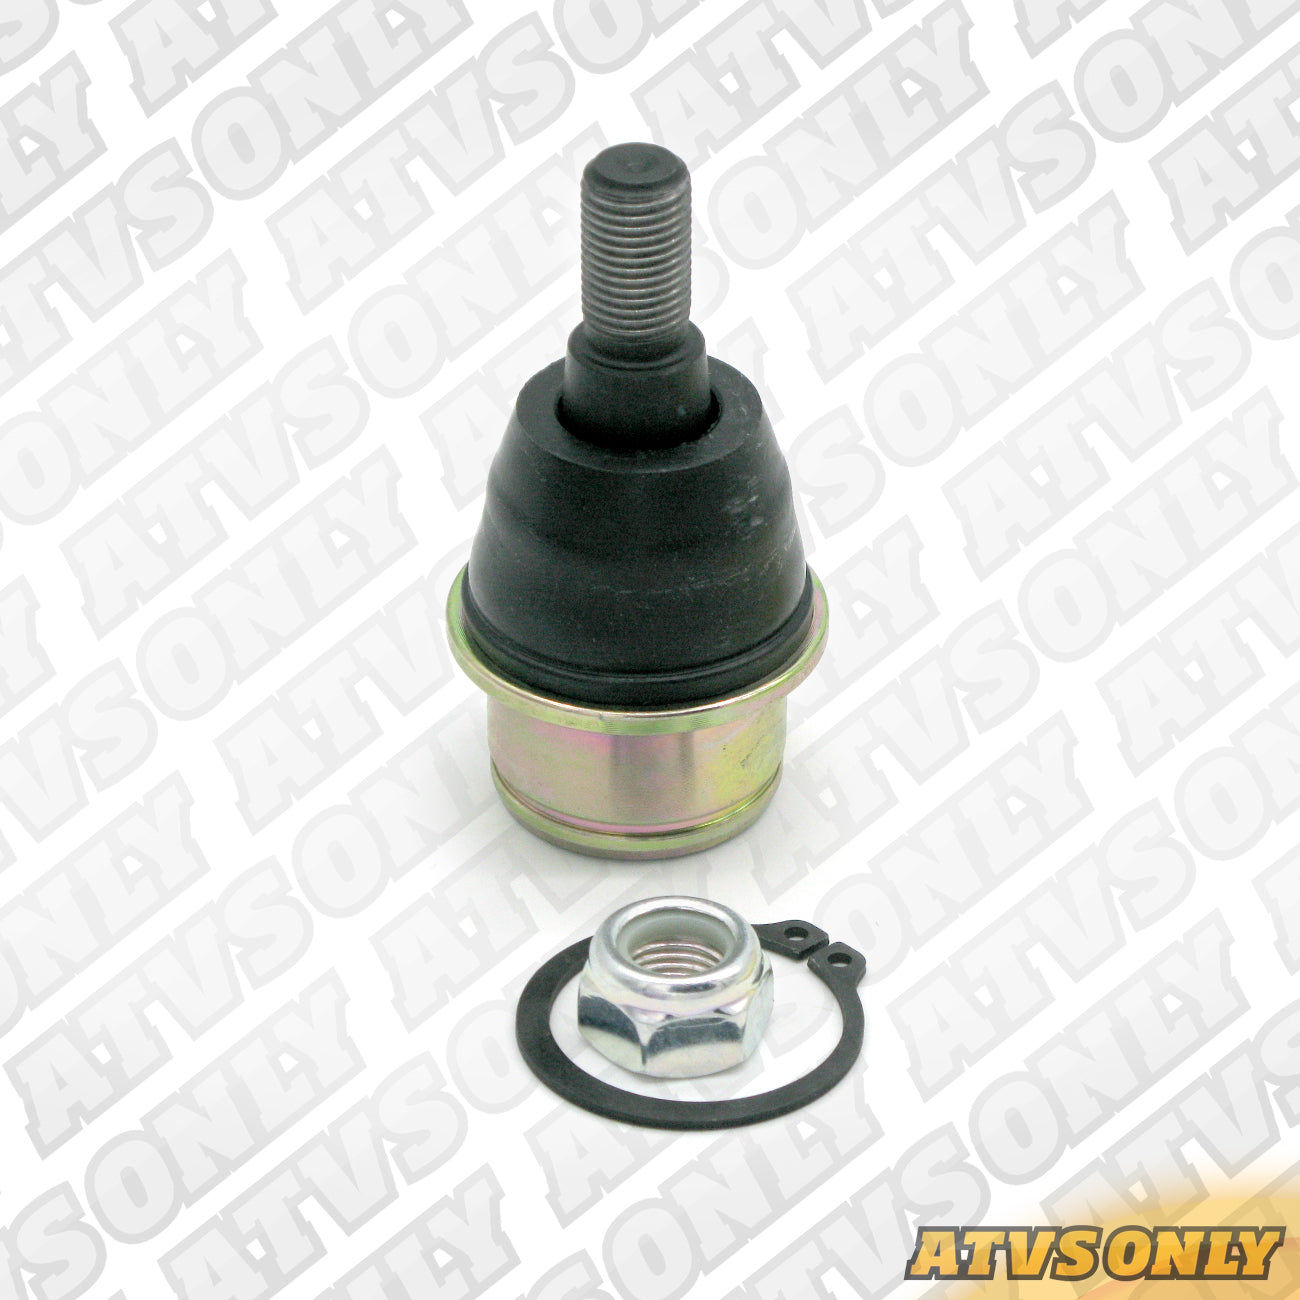 A-Arm Ball Joint (upper) for CanAm Applications